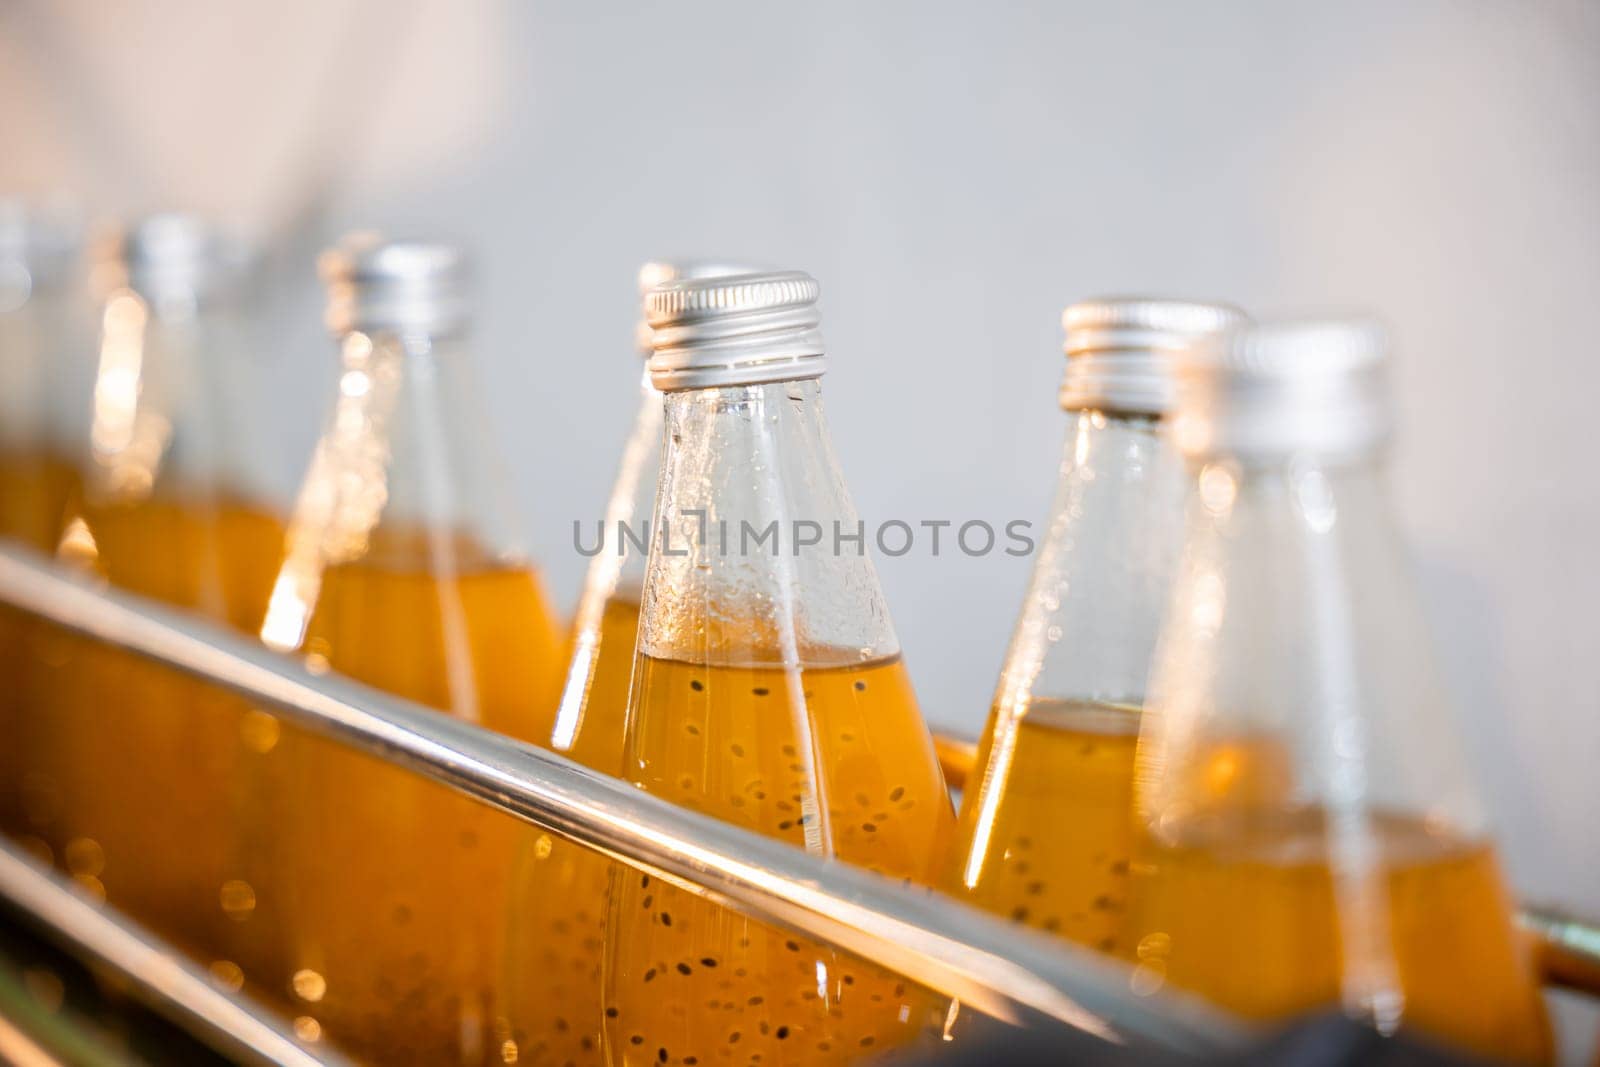 Transparent bottles move on a conveyor belt in a beverage factory filled with basil or chia seed drinks infused with pomegranate. Clean automated manufacturing is evident.